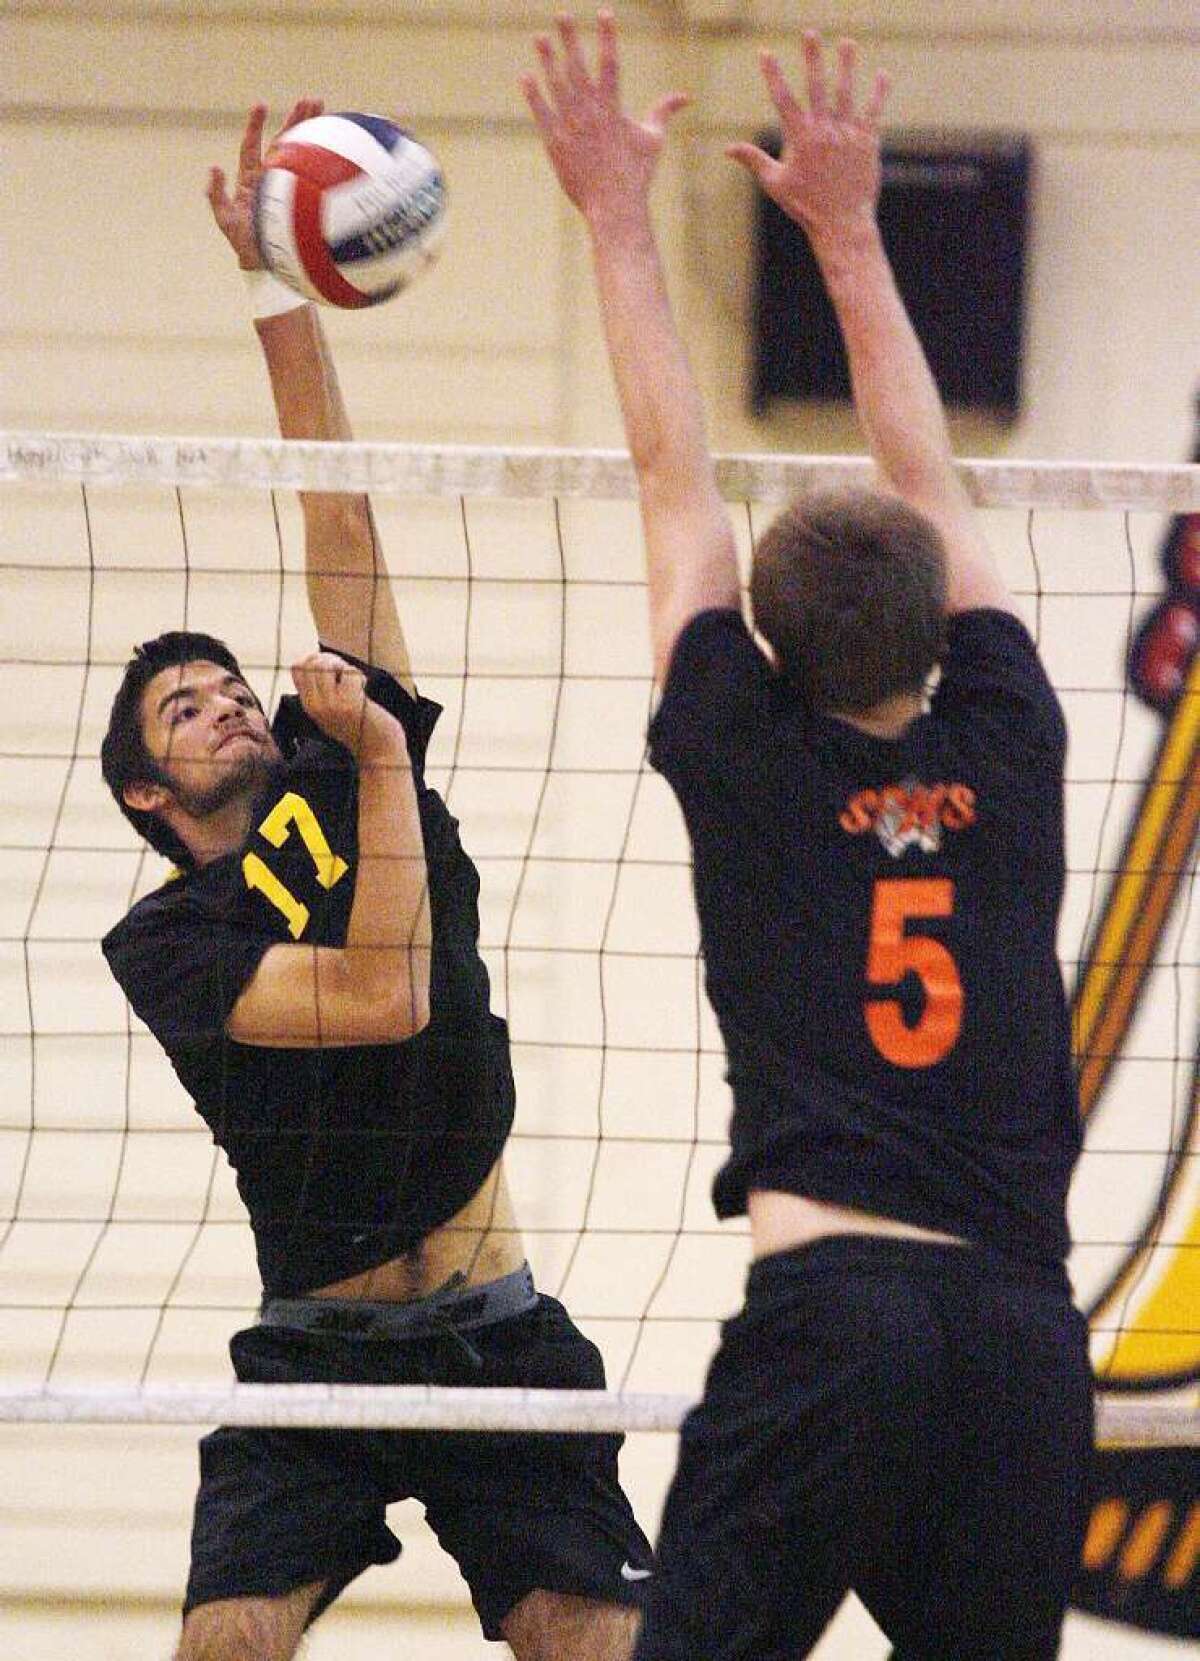 ARCHIVE PHOTO: La Cañada High's Orion Burl, left, is an All-Area Boys' Volleyball second-team selection.